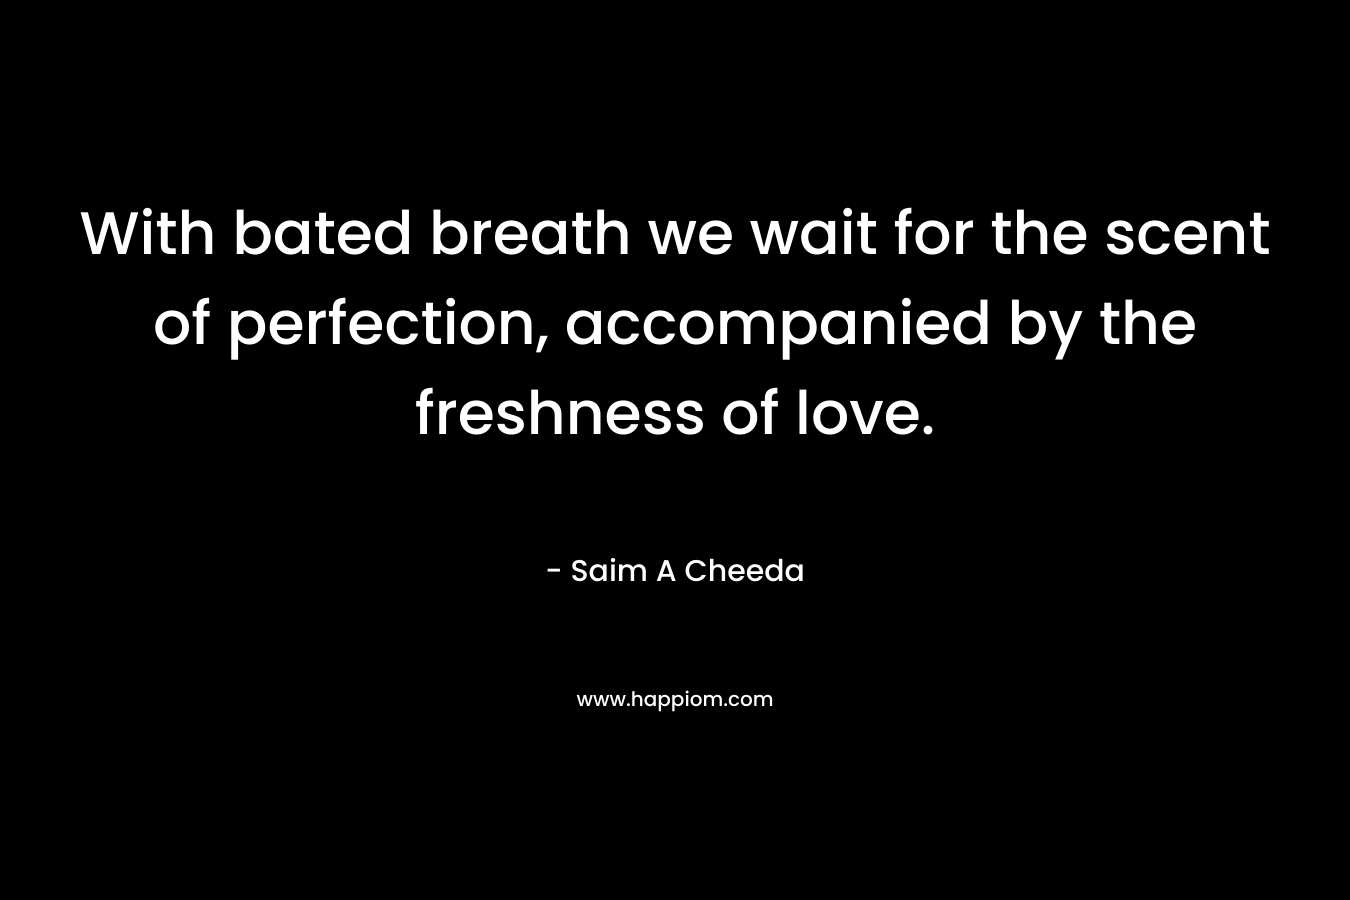 With bated breath we wait for the scent of perfection, accompanied by the freshness of love. – Saim A Cheeda